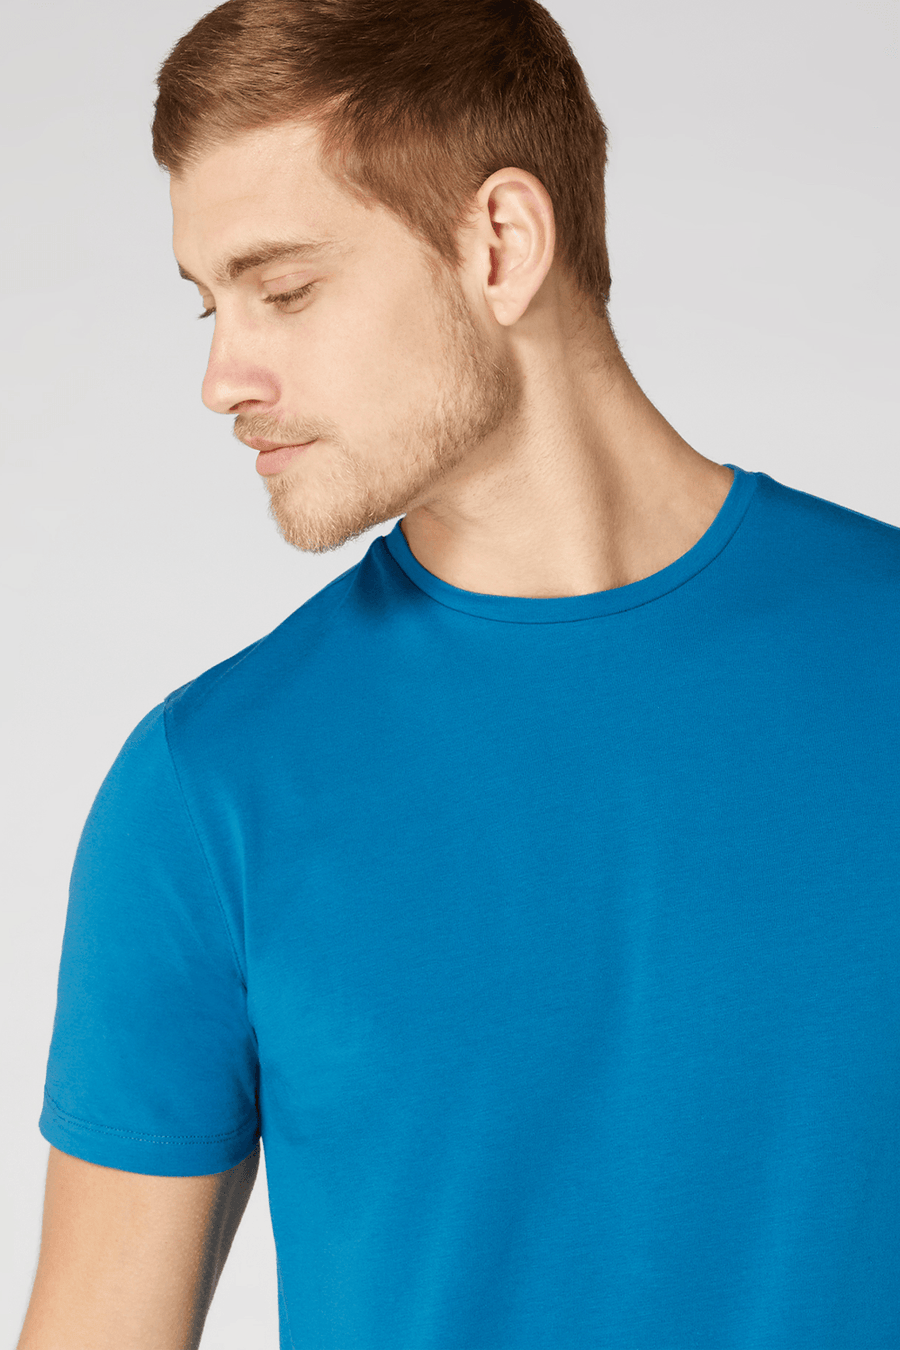 Buy the Remus Uomo Tapered Fit Cotton-Stretch T-Shirt in Sapphire Blue at Intro. Spend £50 for free UK delivery. Official stockists. We ship worldwide.